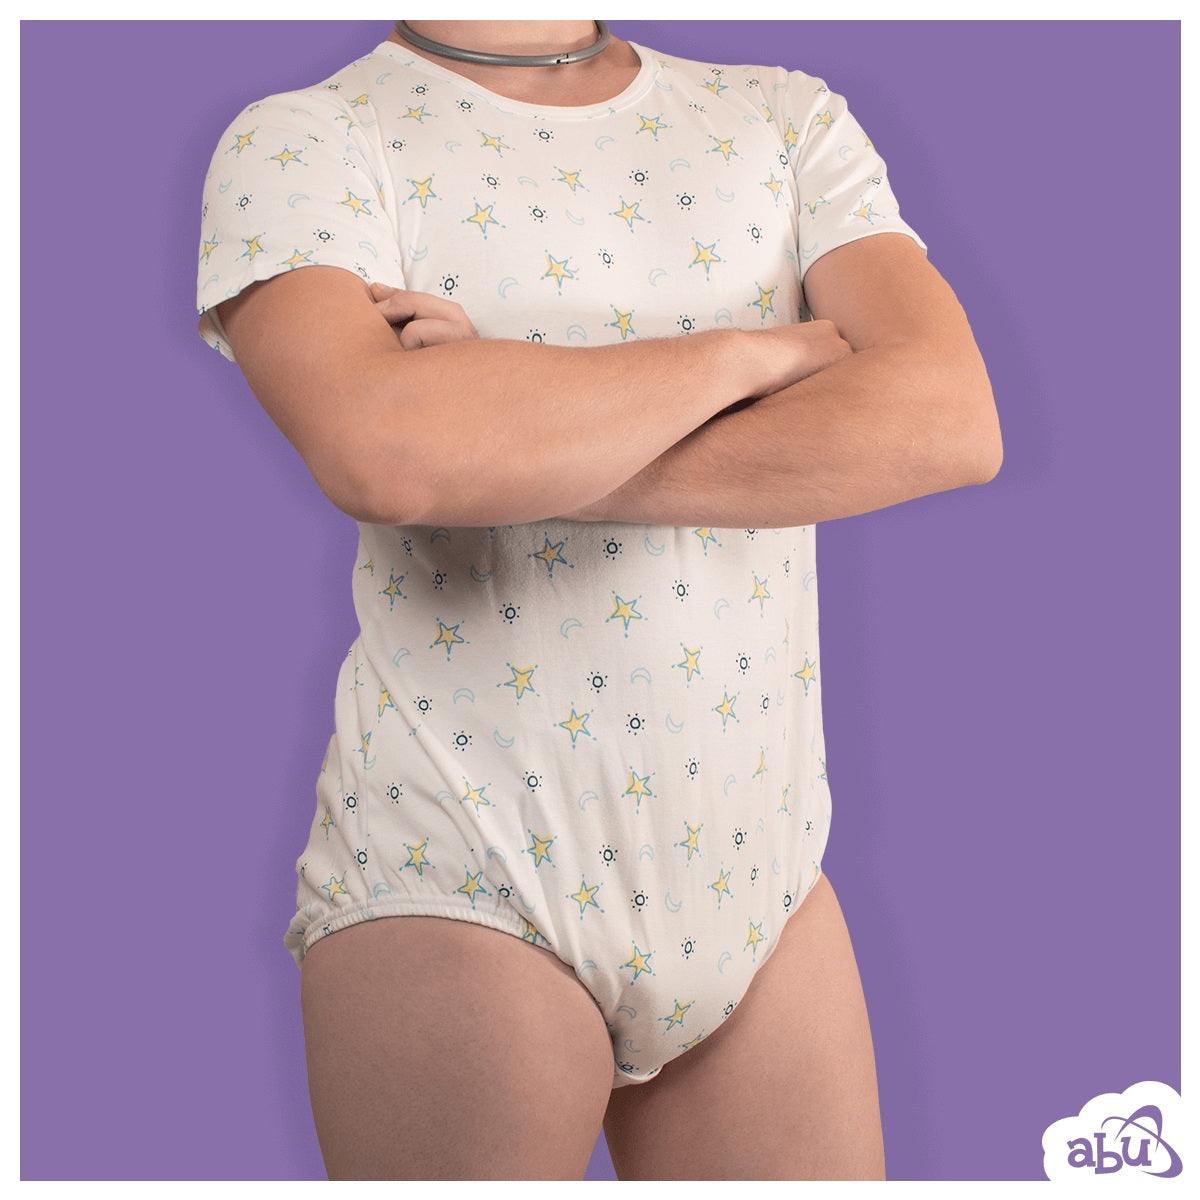 Front view of model wearing moon and stars print diapersuit with disposable diaper worn underneath.